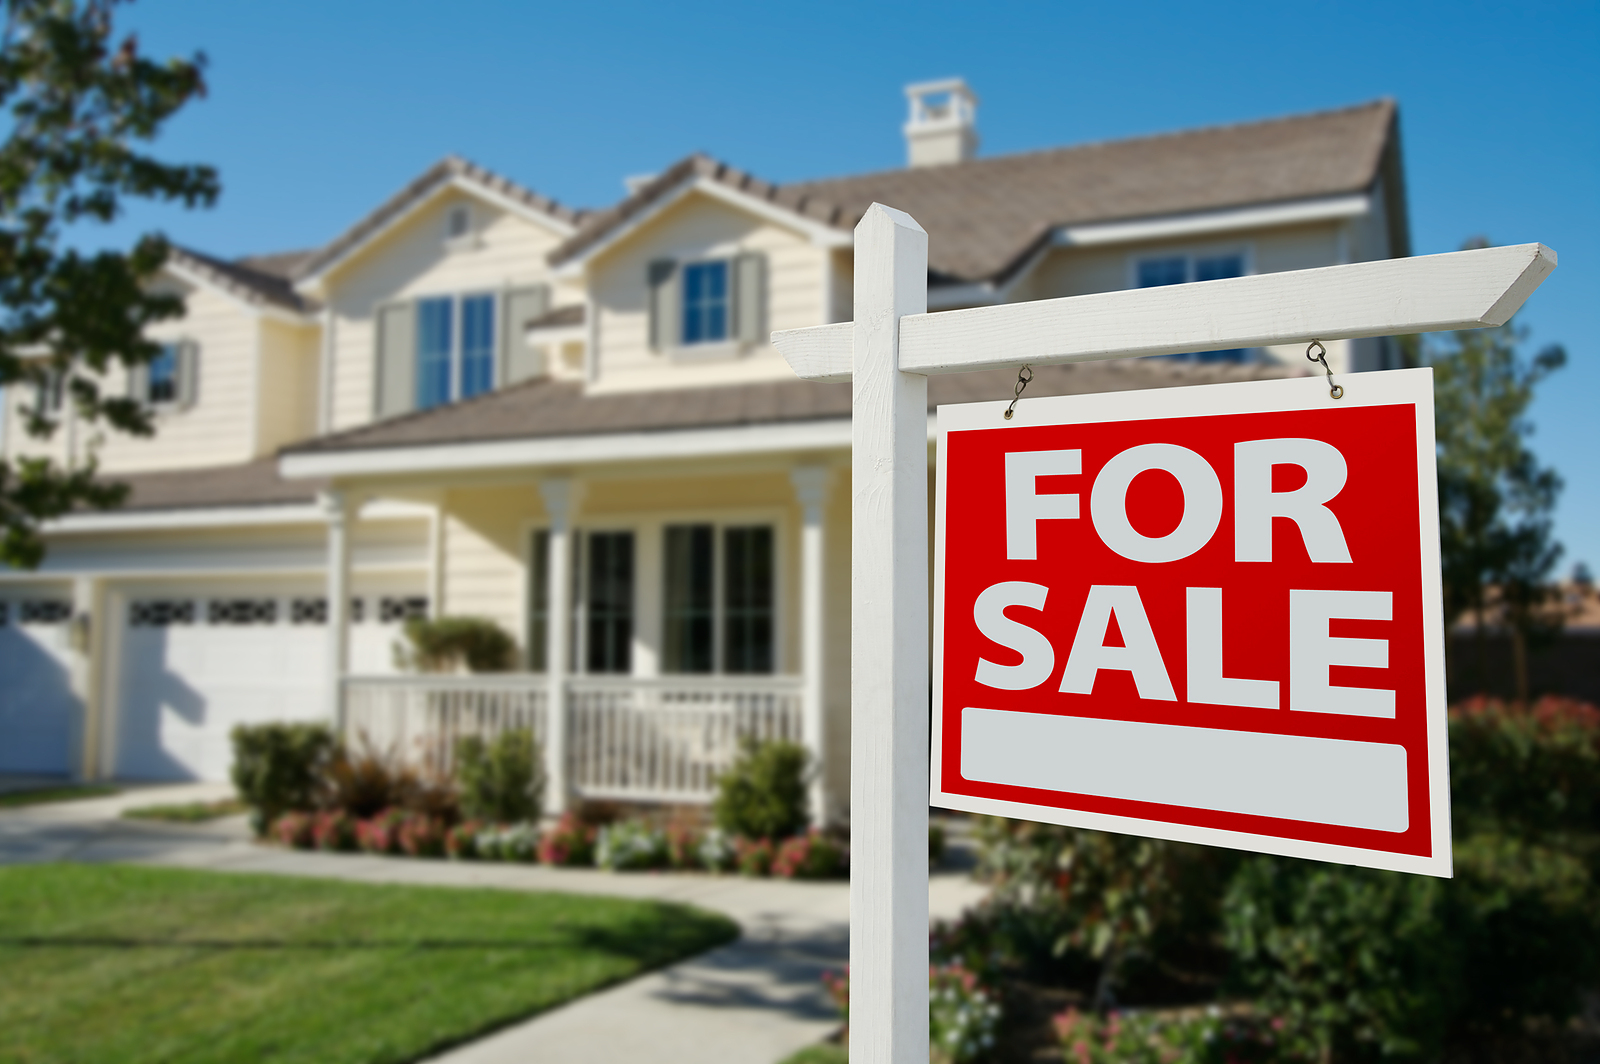 5 Steps of Closing the Real Estate Deal Efficiently